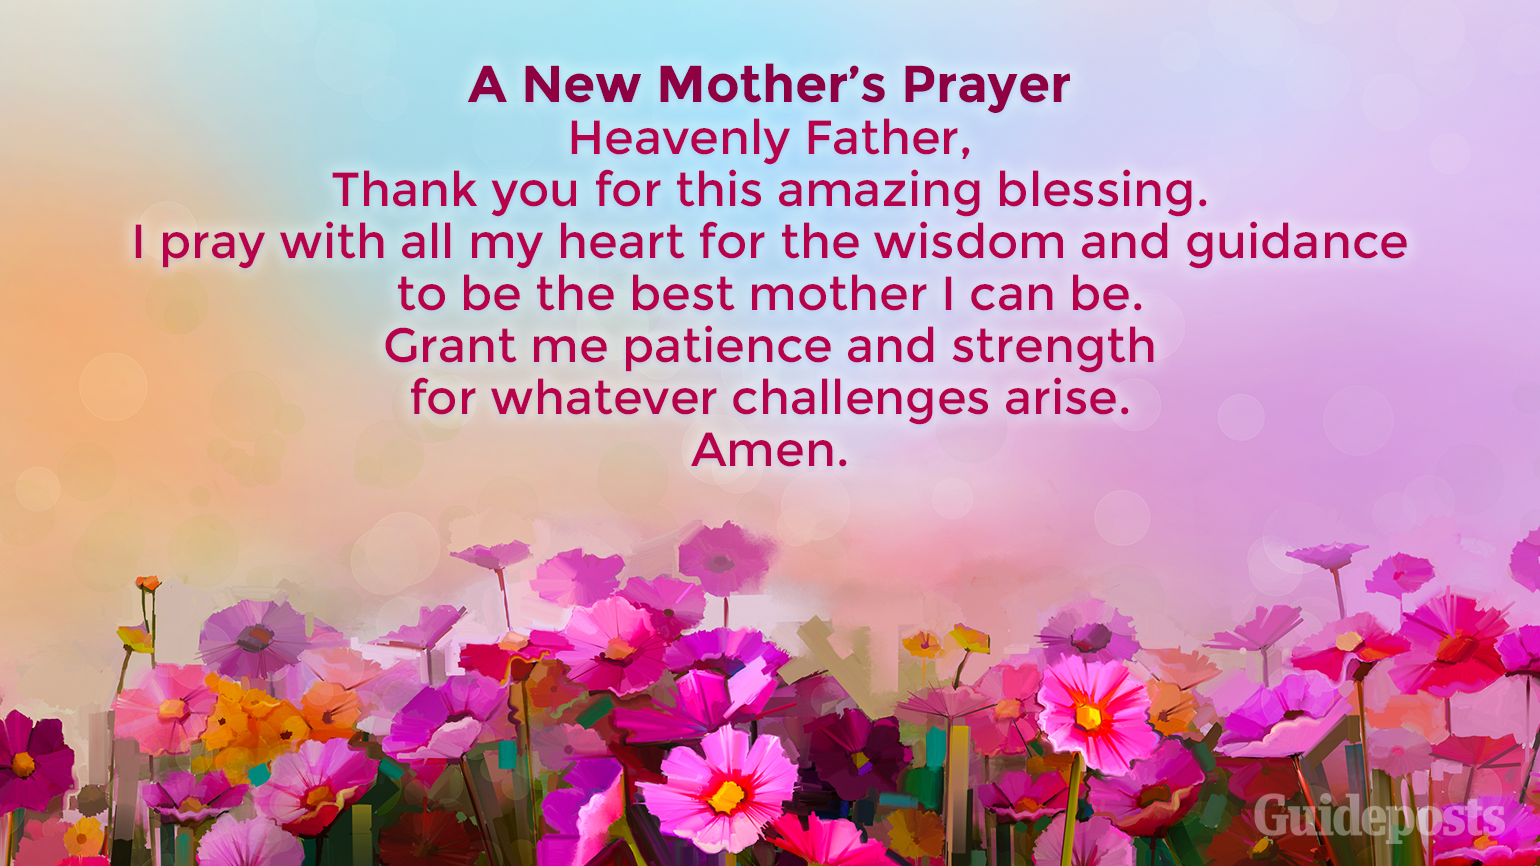 Celebrate motherhood with these 9 prayers and blessings.